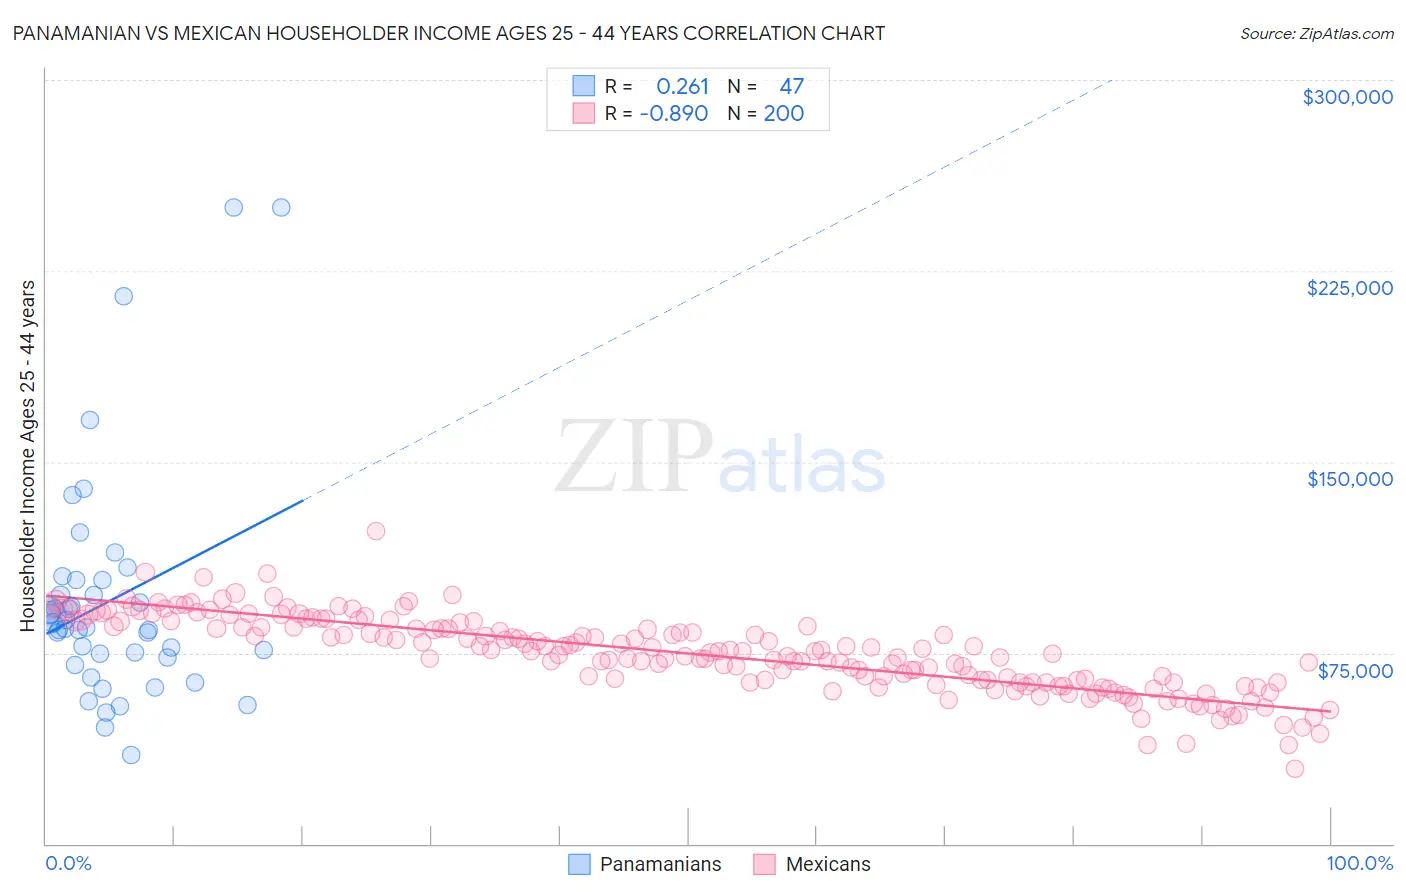 Panamanian vs Mexican Householder Income Ages 25 - 44 years